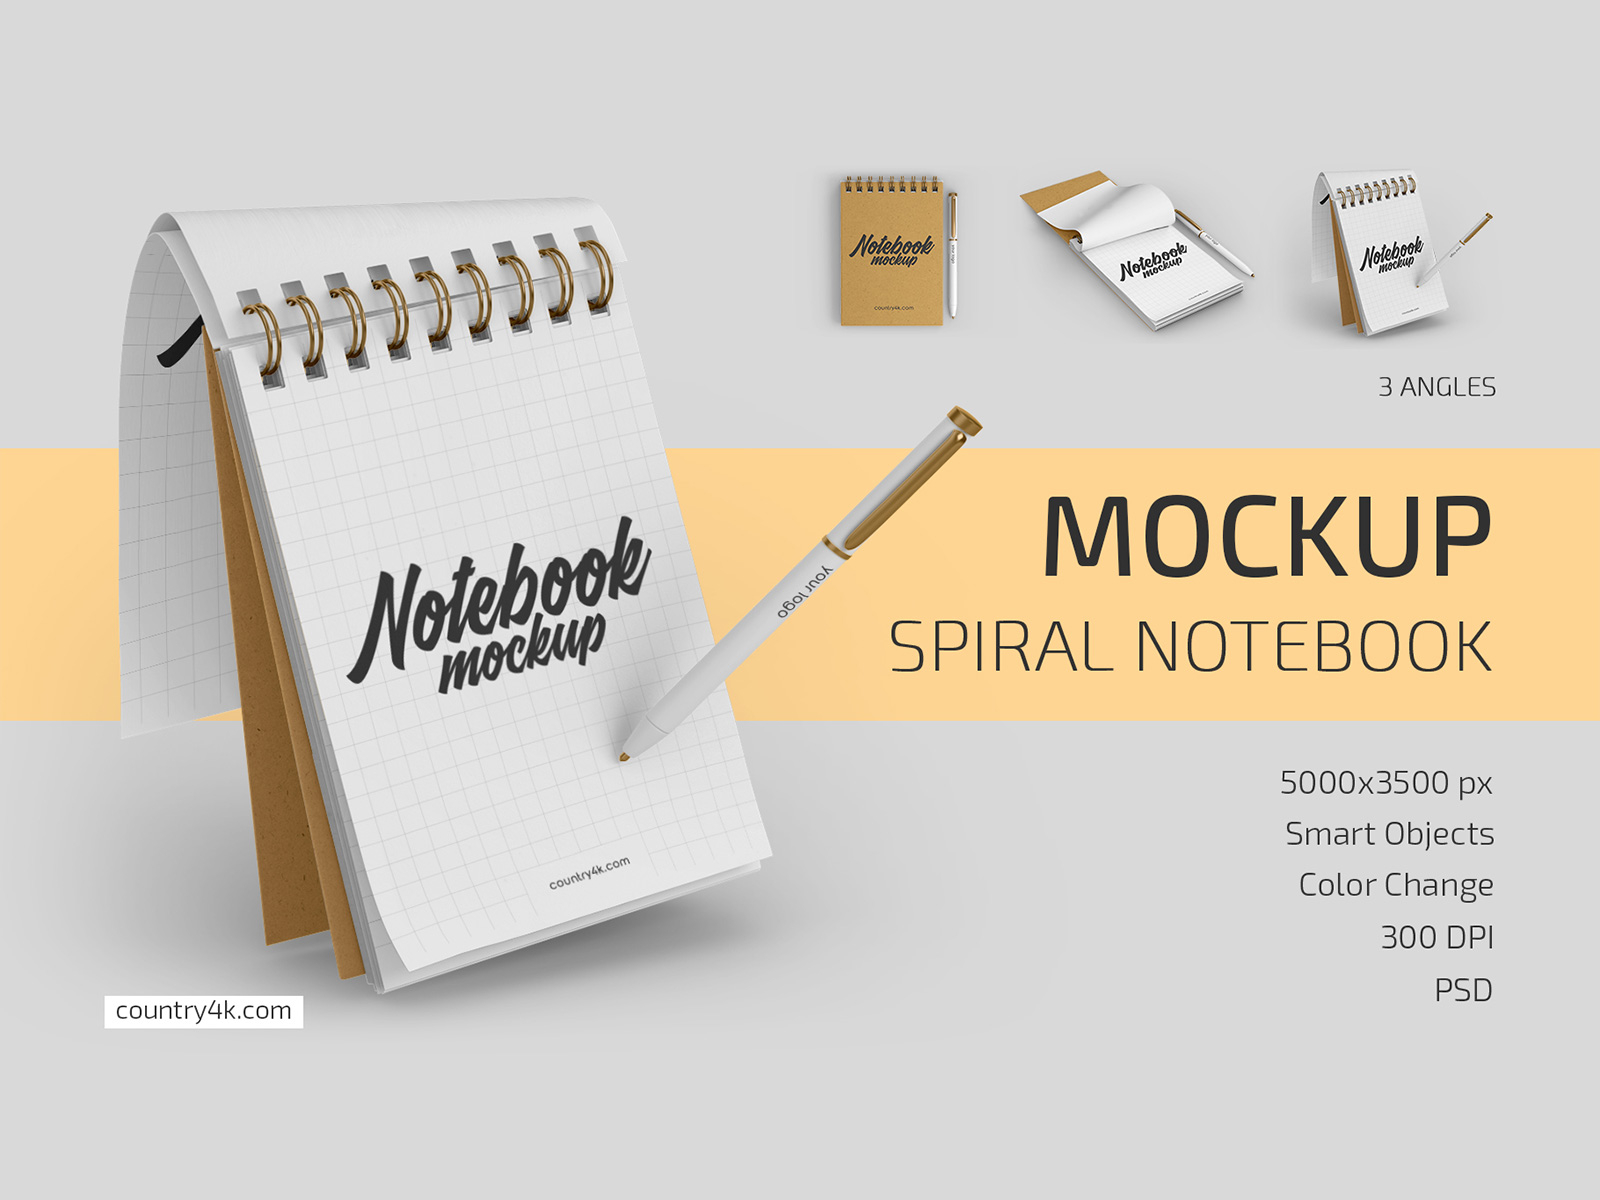 Download Spiral Notebook Mockup Set By Country4k On Dribbble PSD Mockup Templates